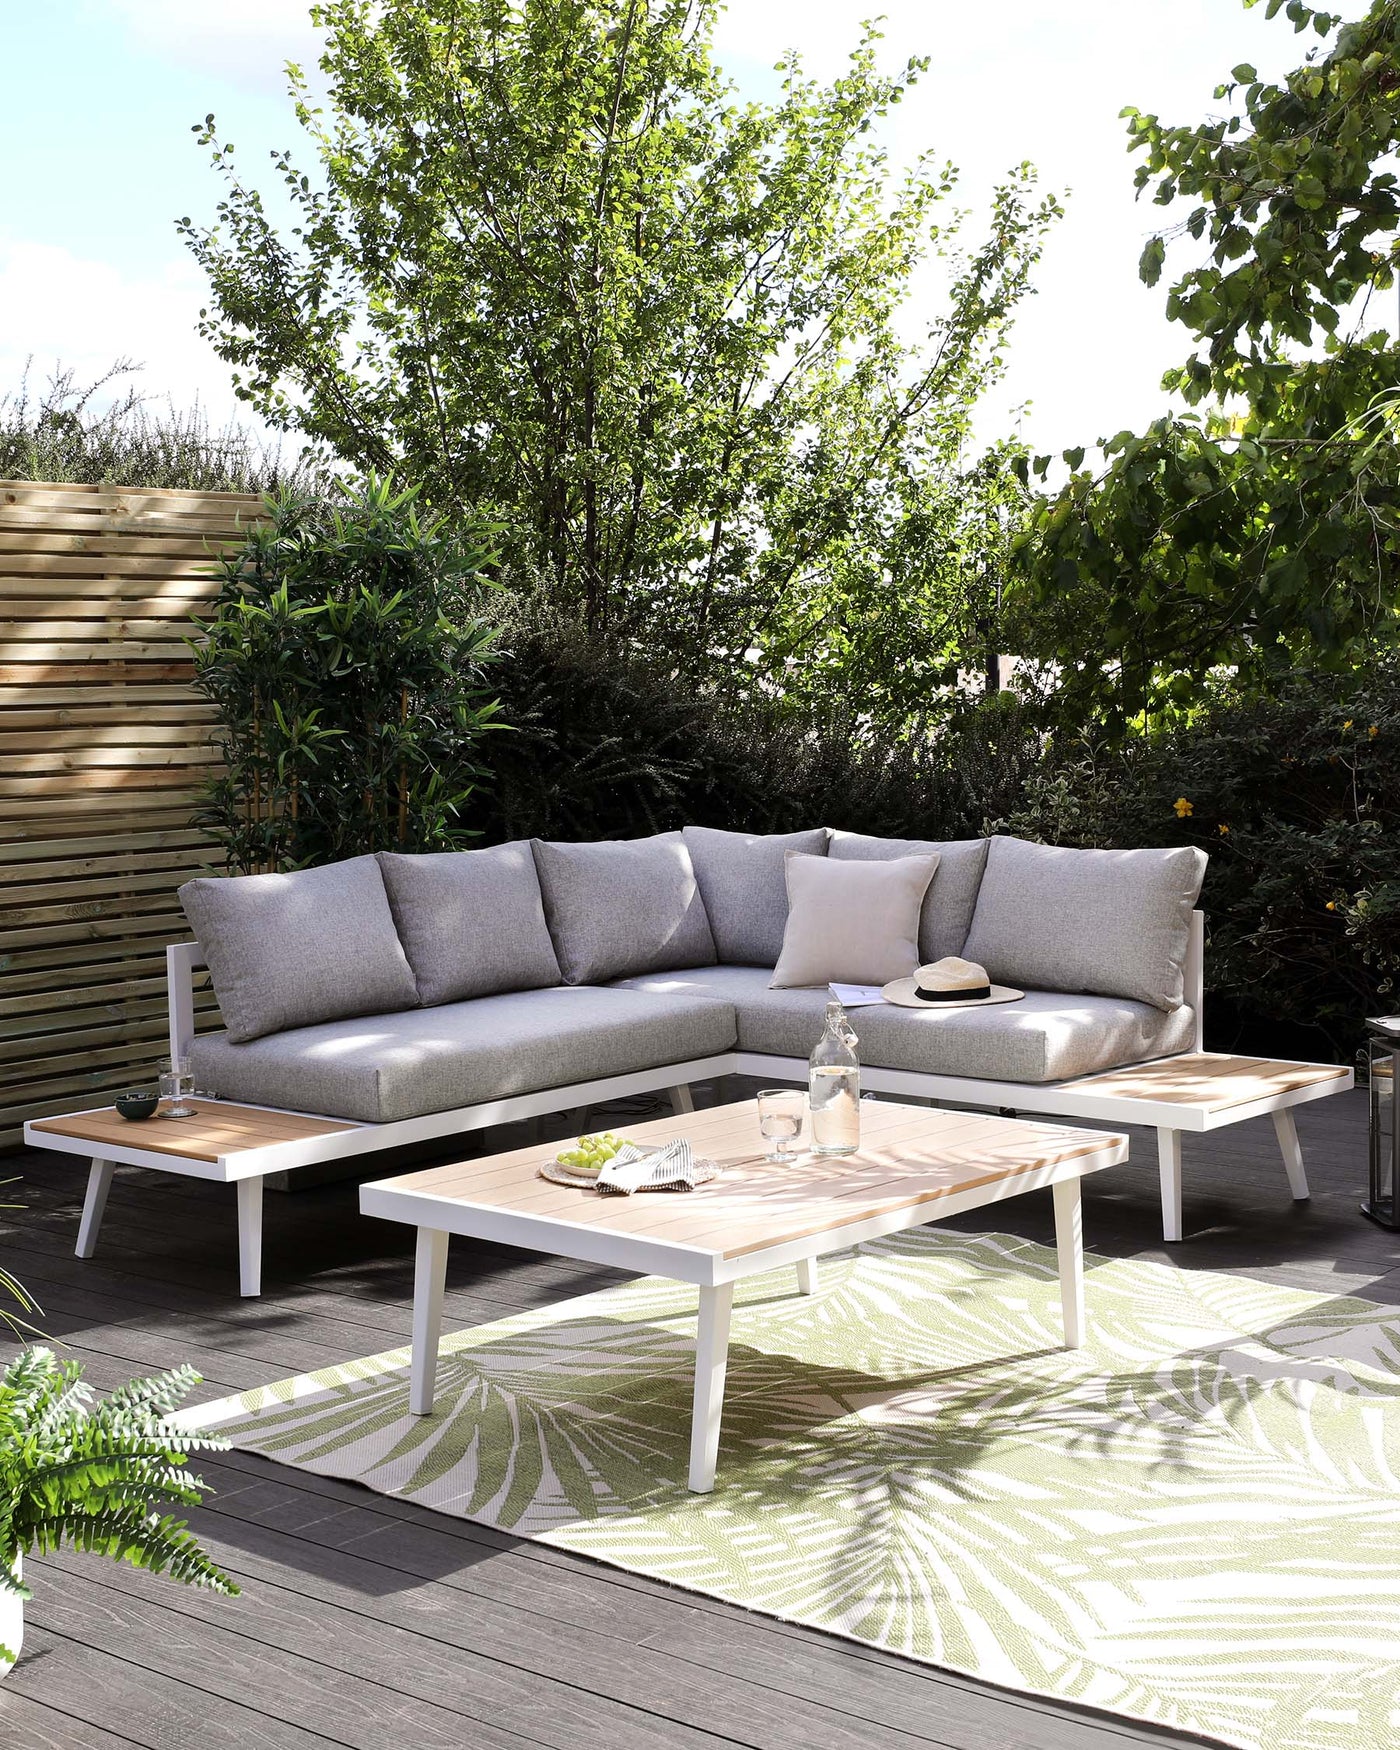 Outdoor sectional sofa with light grey cushions and a natural wood frame, accompanied by two matching coffee tables with white legs and a slatted wood top. The arrangement is placed on a deck with a patterned outdoor rug, enhancing the cosy ambiance.